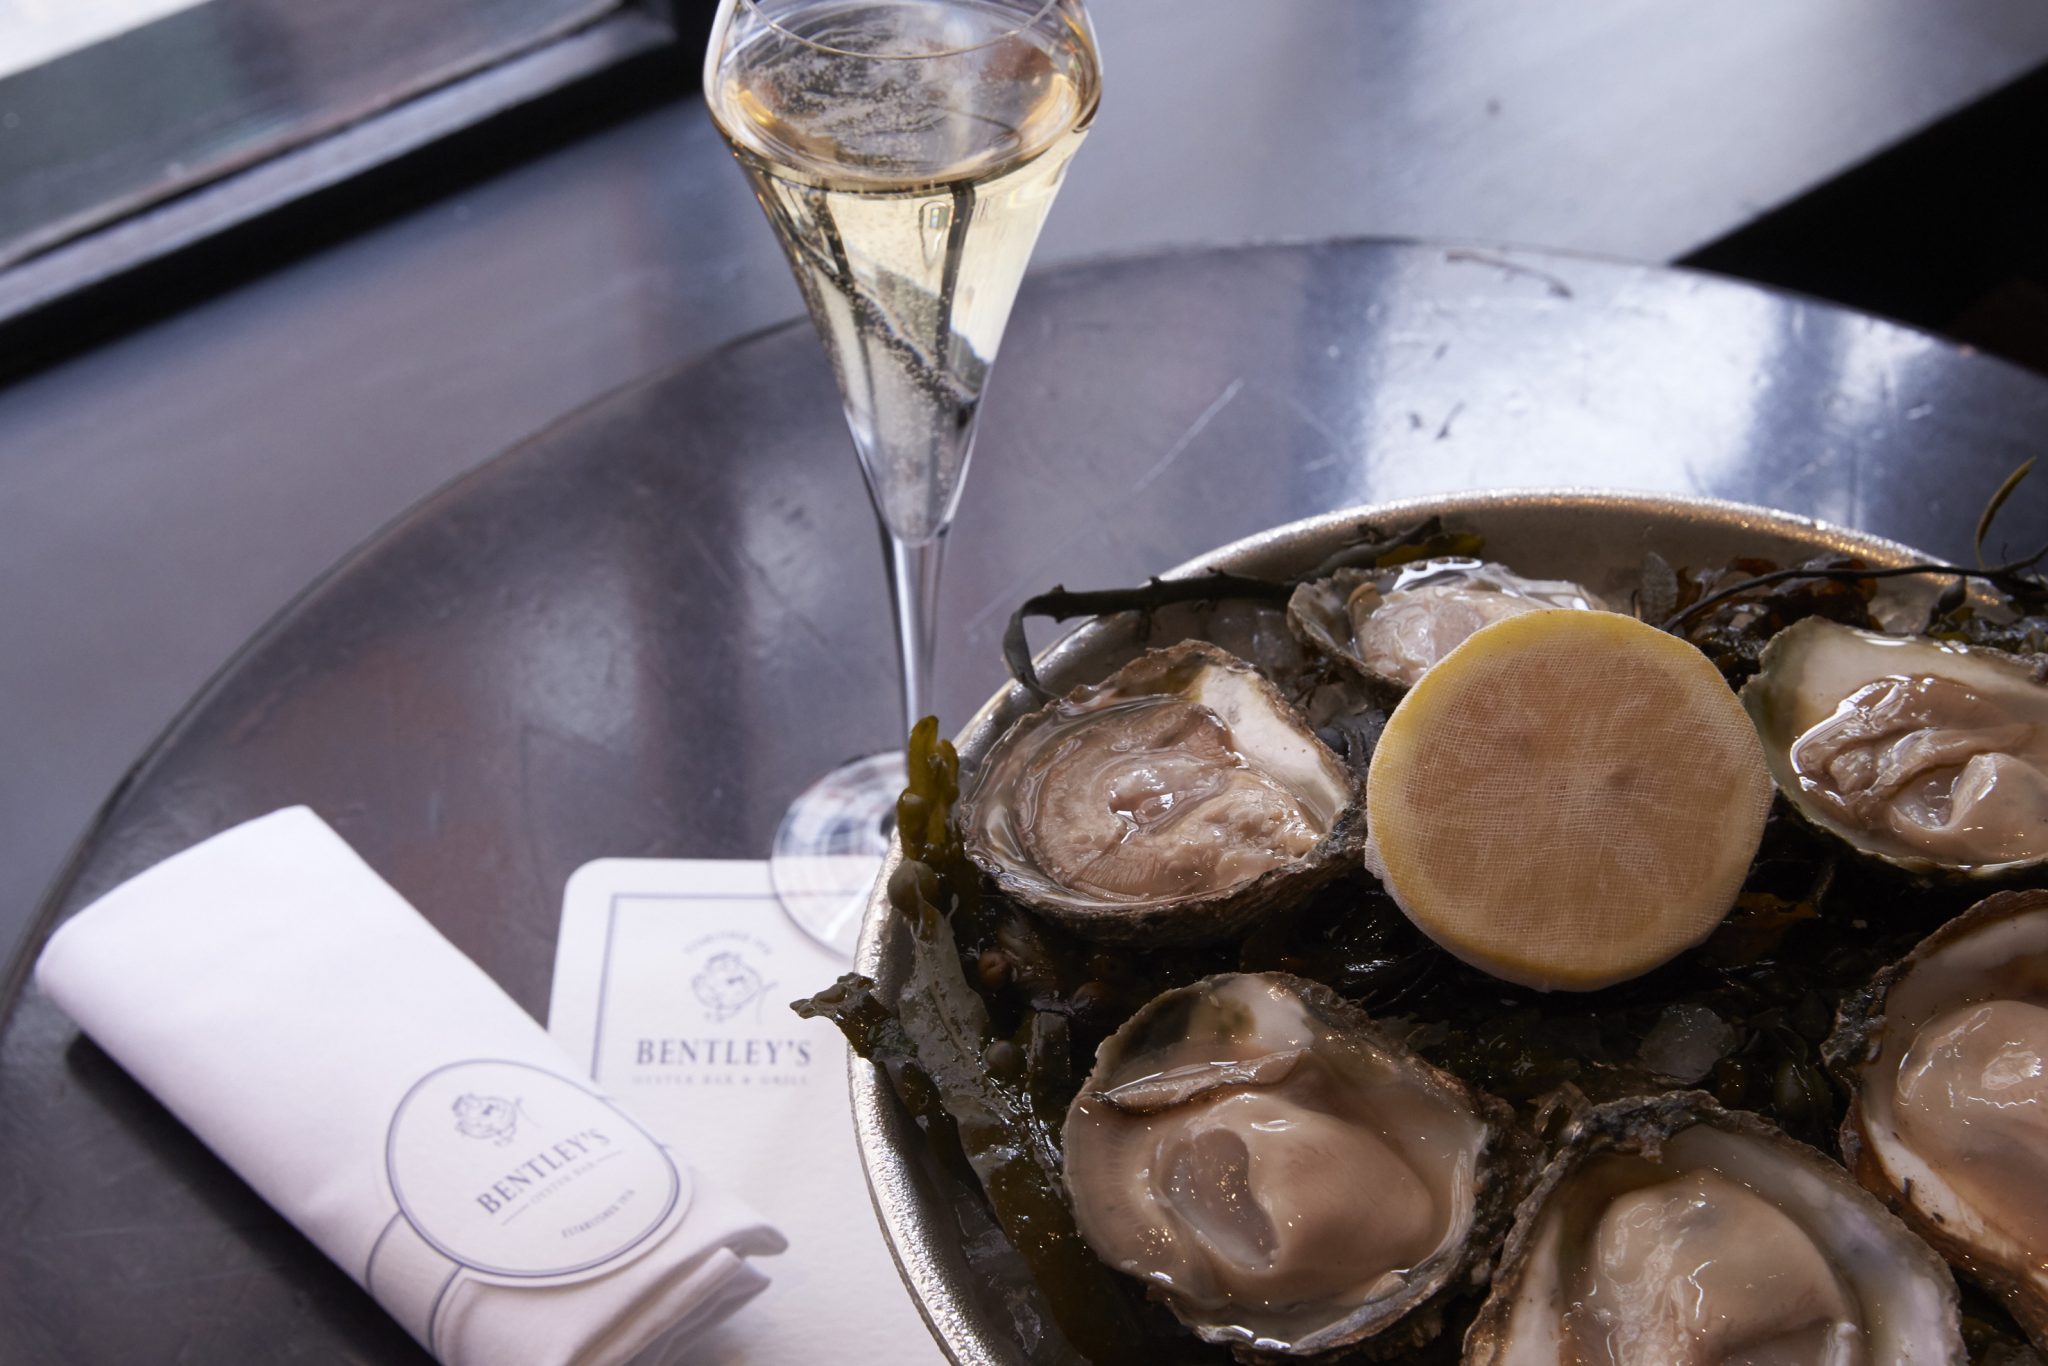 Oyster Masterclass at Bentley’s Oyster Bar & Grill